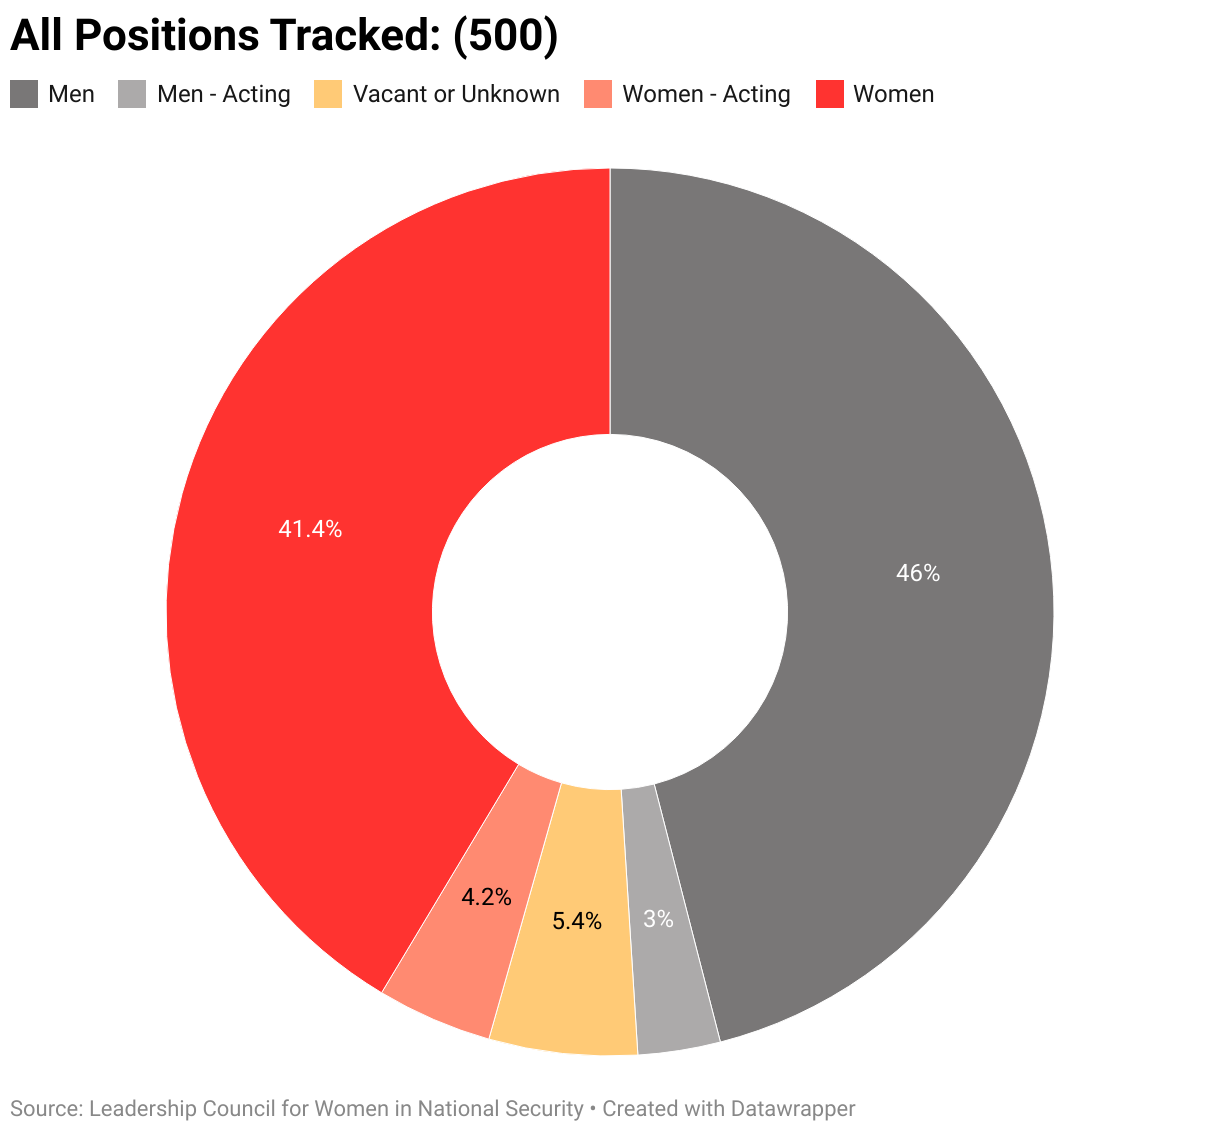 The gendered breakdown of all positions tracked by LCWINS (500).